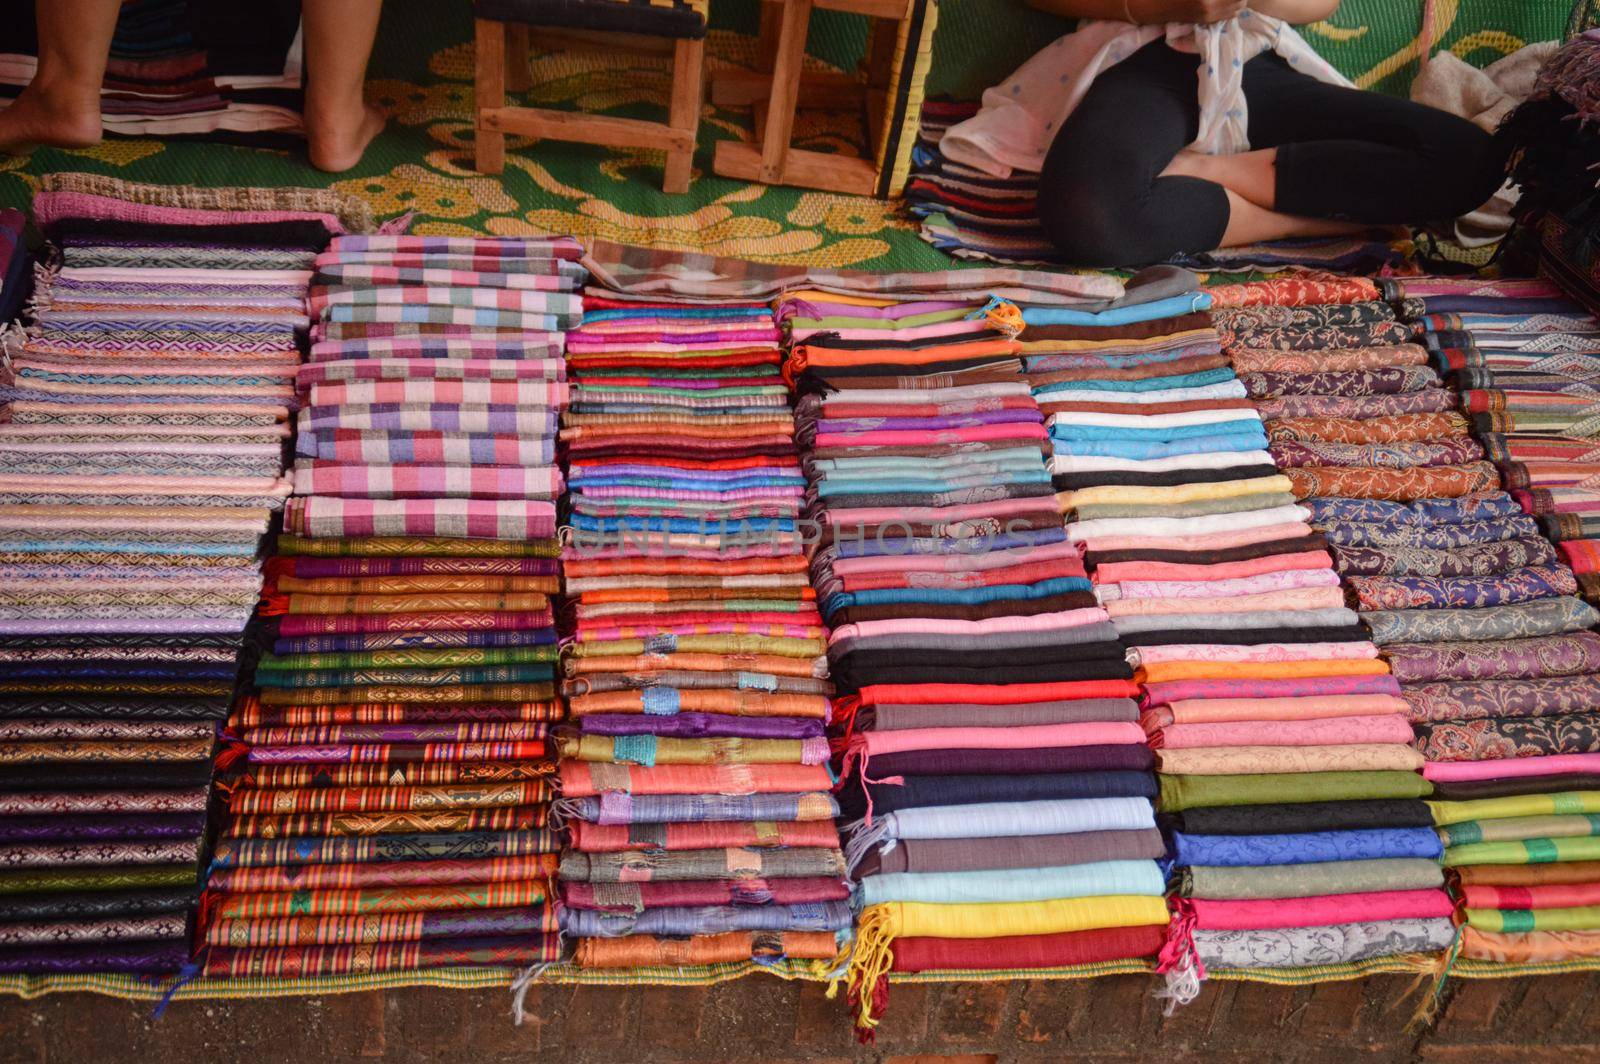 Popular souvenirs sold to tourist in the famous night market of Luang Prabang, Laos